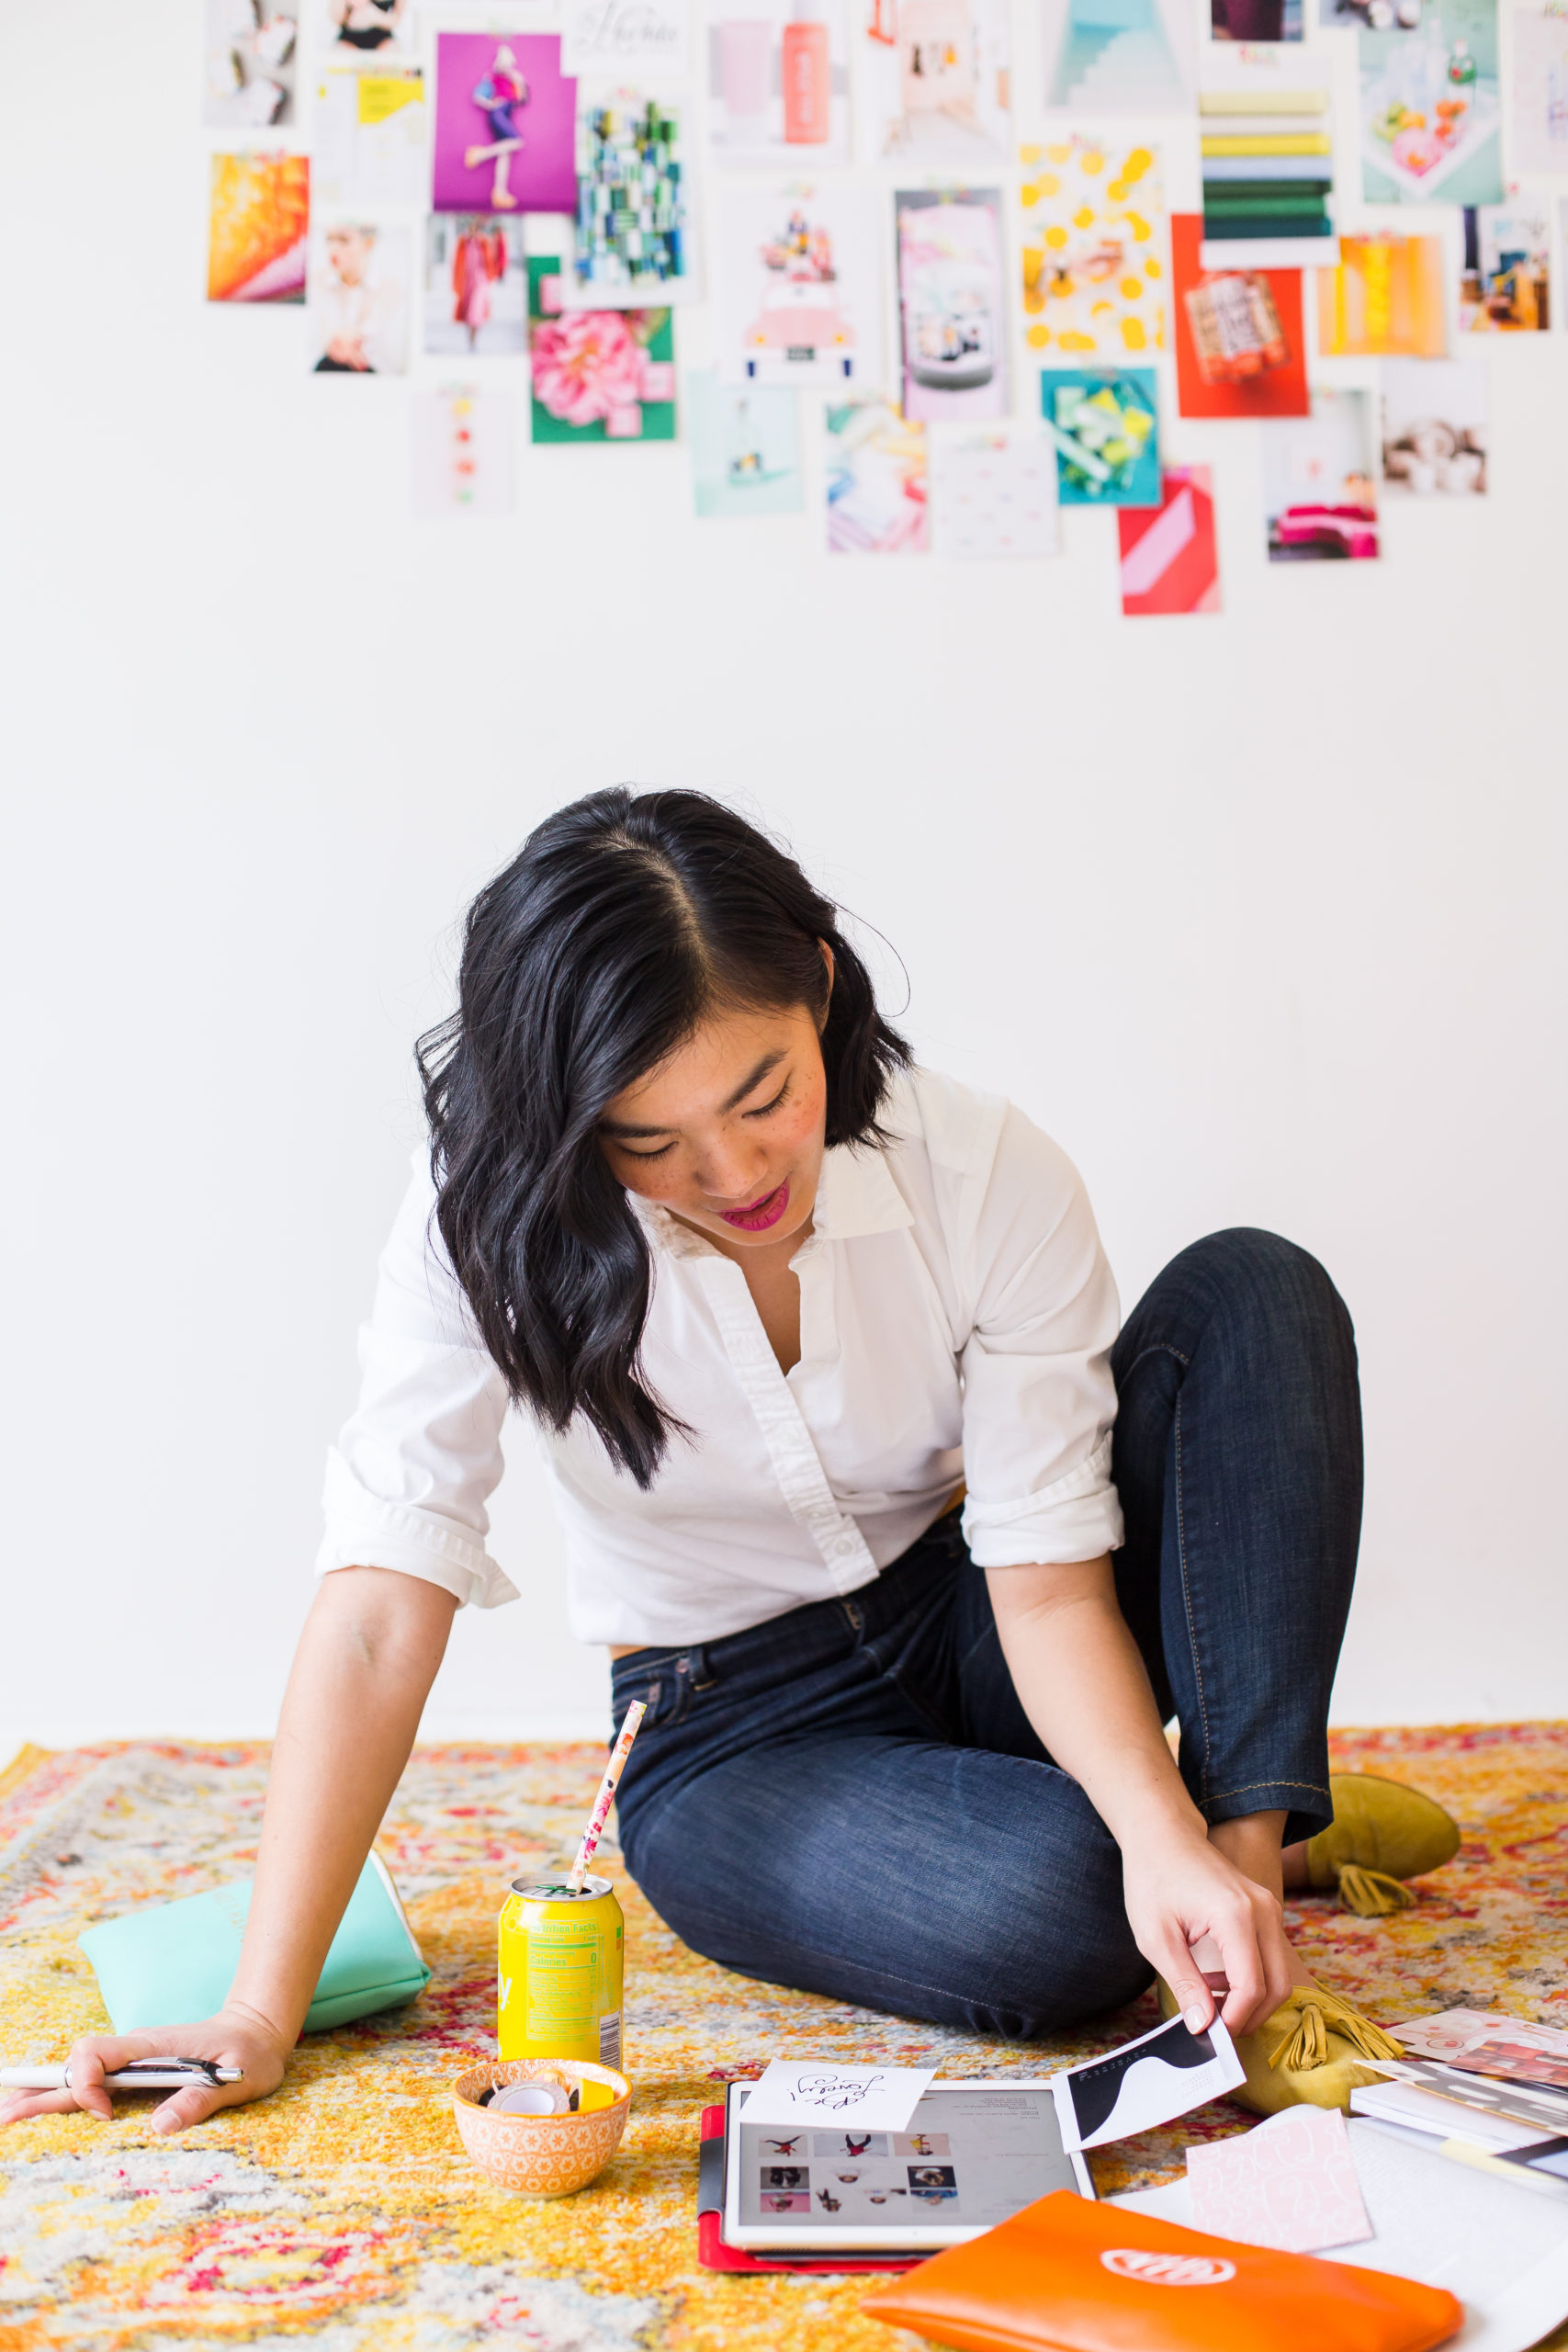 woman in white shirt and jeans sitting on a yellow rug comparing looking at design inspiration photos